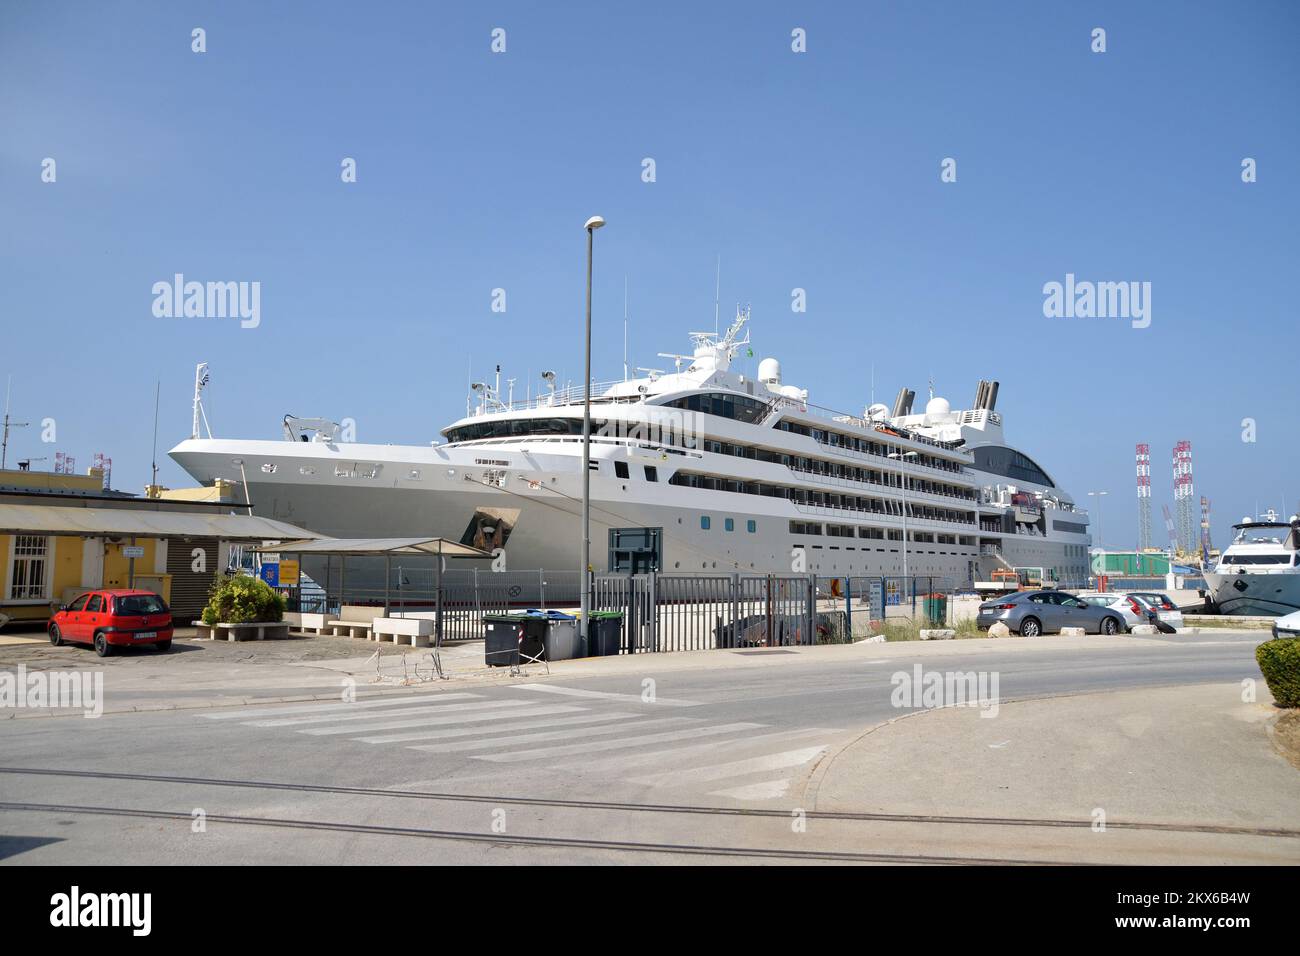 30.05.2018., Pula- Cruiser Le Lyrial, 142 meters long, built in the Italian shipyard Fincantieri in Ancona, drove this morning came on few hours in Pula This luxury boat, has 122 cabins with private balconies, receiving 264 passengers, of which nearly 150 crew members are cared for. Photo: Dusko Marusic/Pixsell  Stock Photo